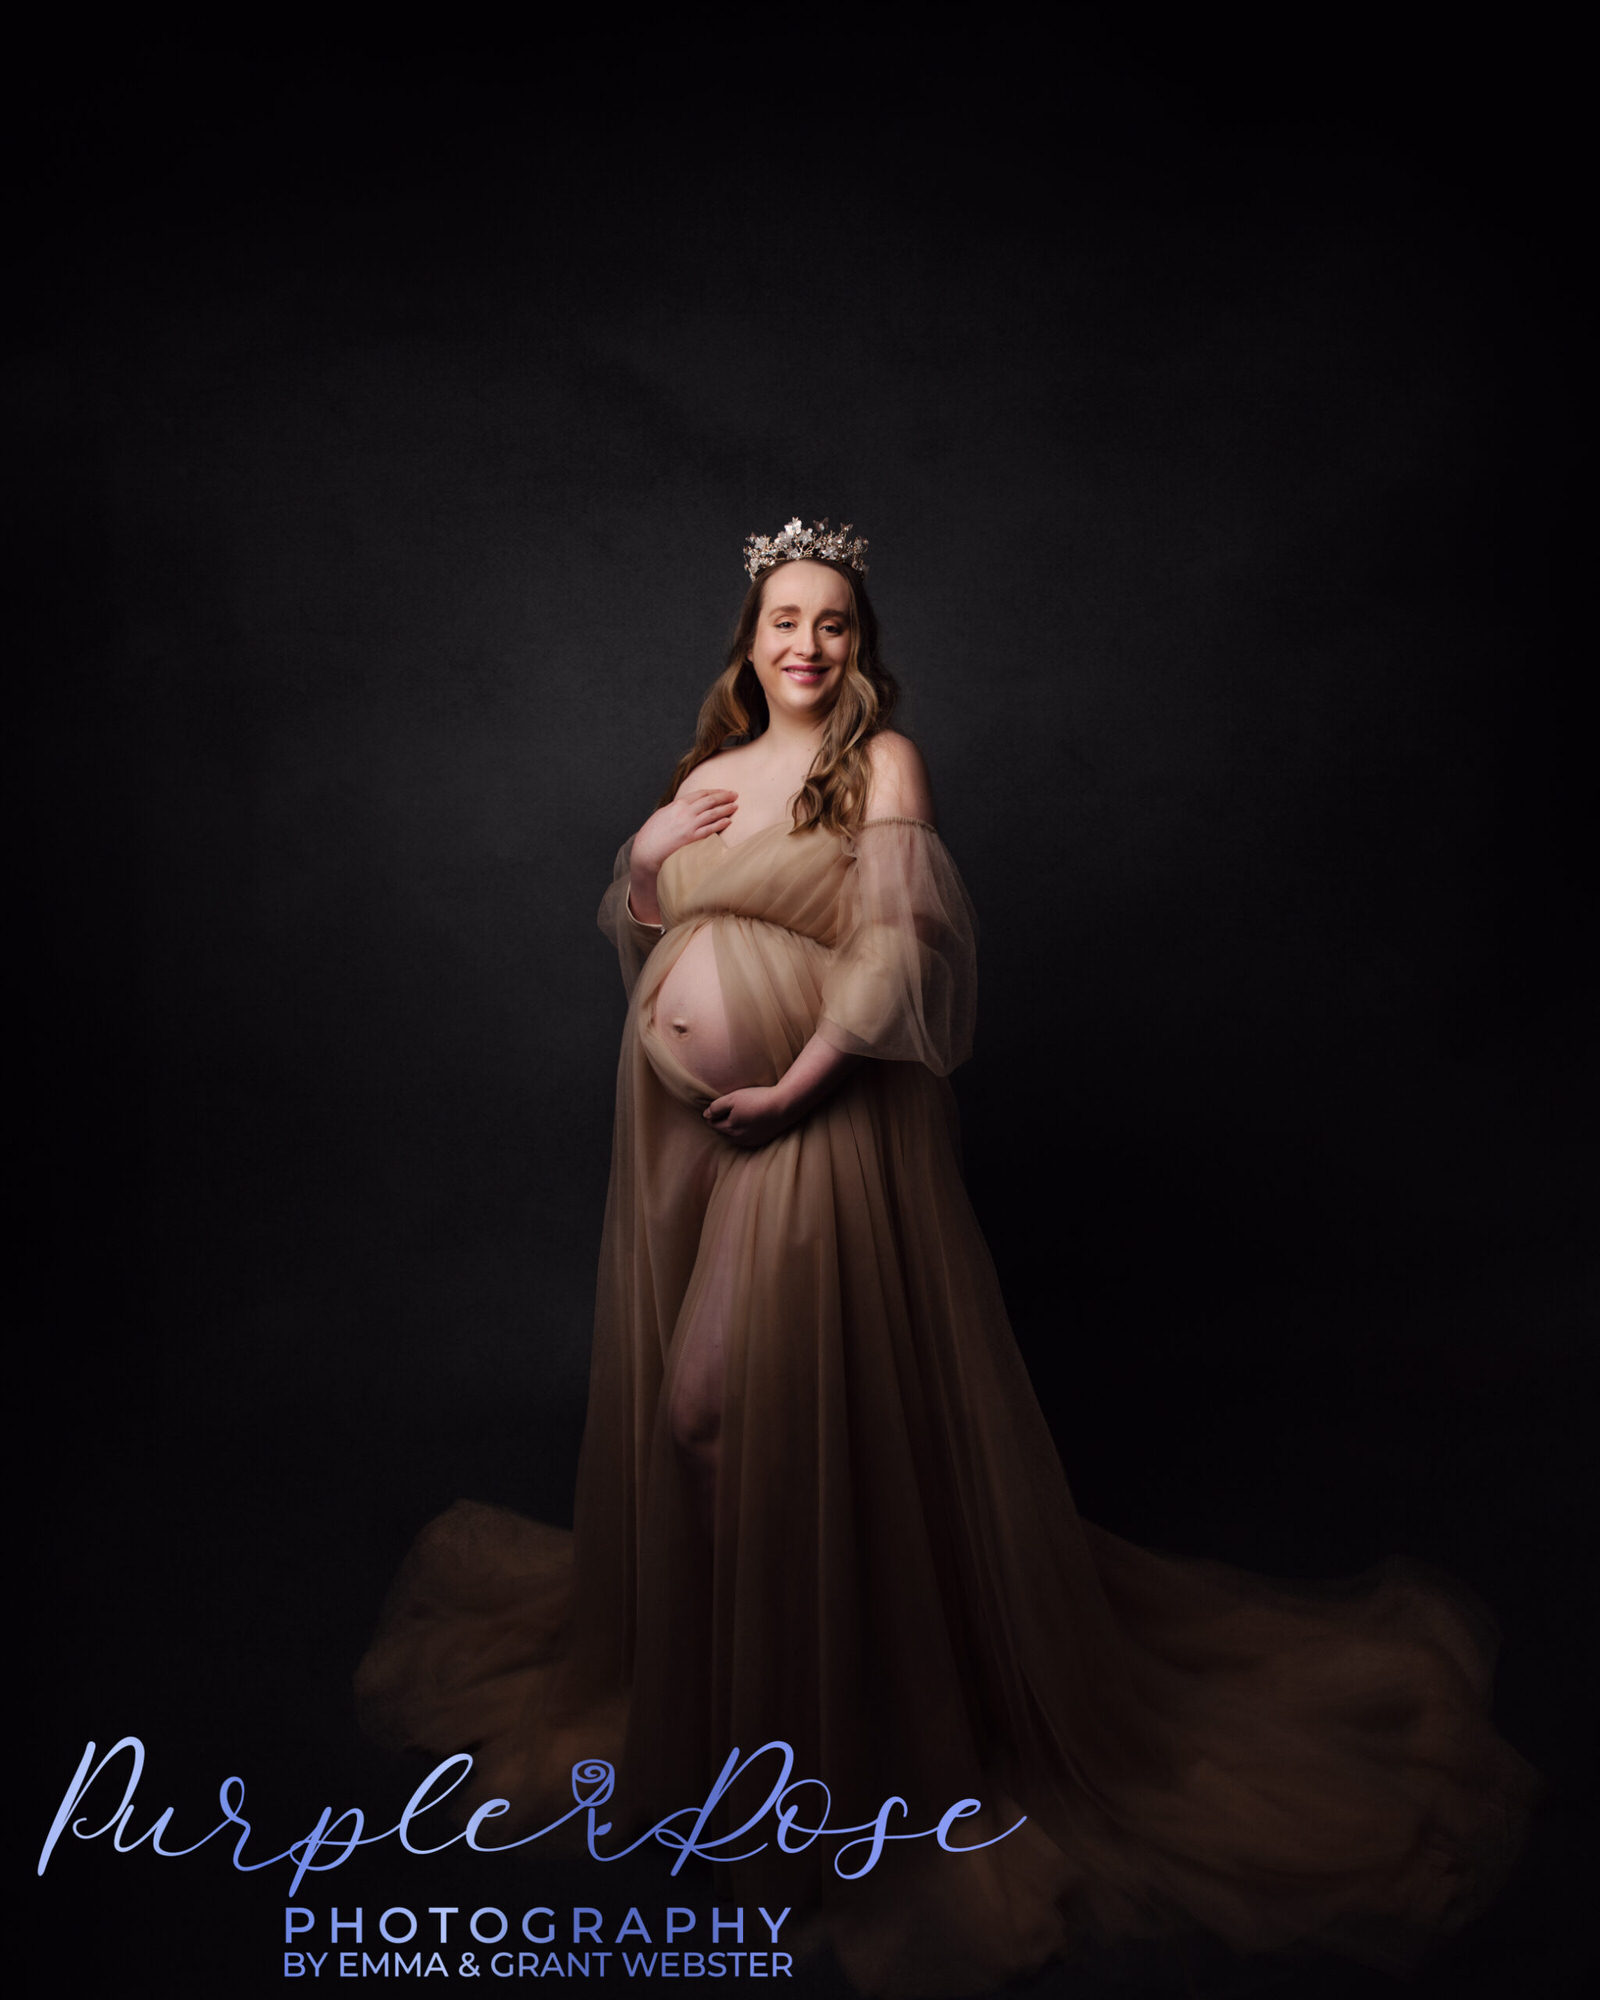 Pregnancy photo of a lady in cream tulle dress and crown cradling her baby bump at her maternity photoshoot in Milton Keynes